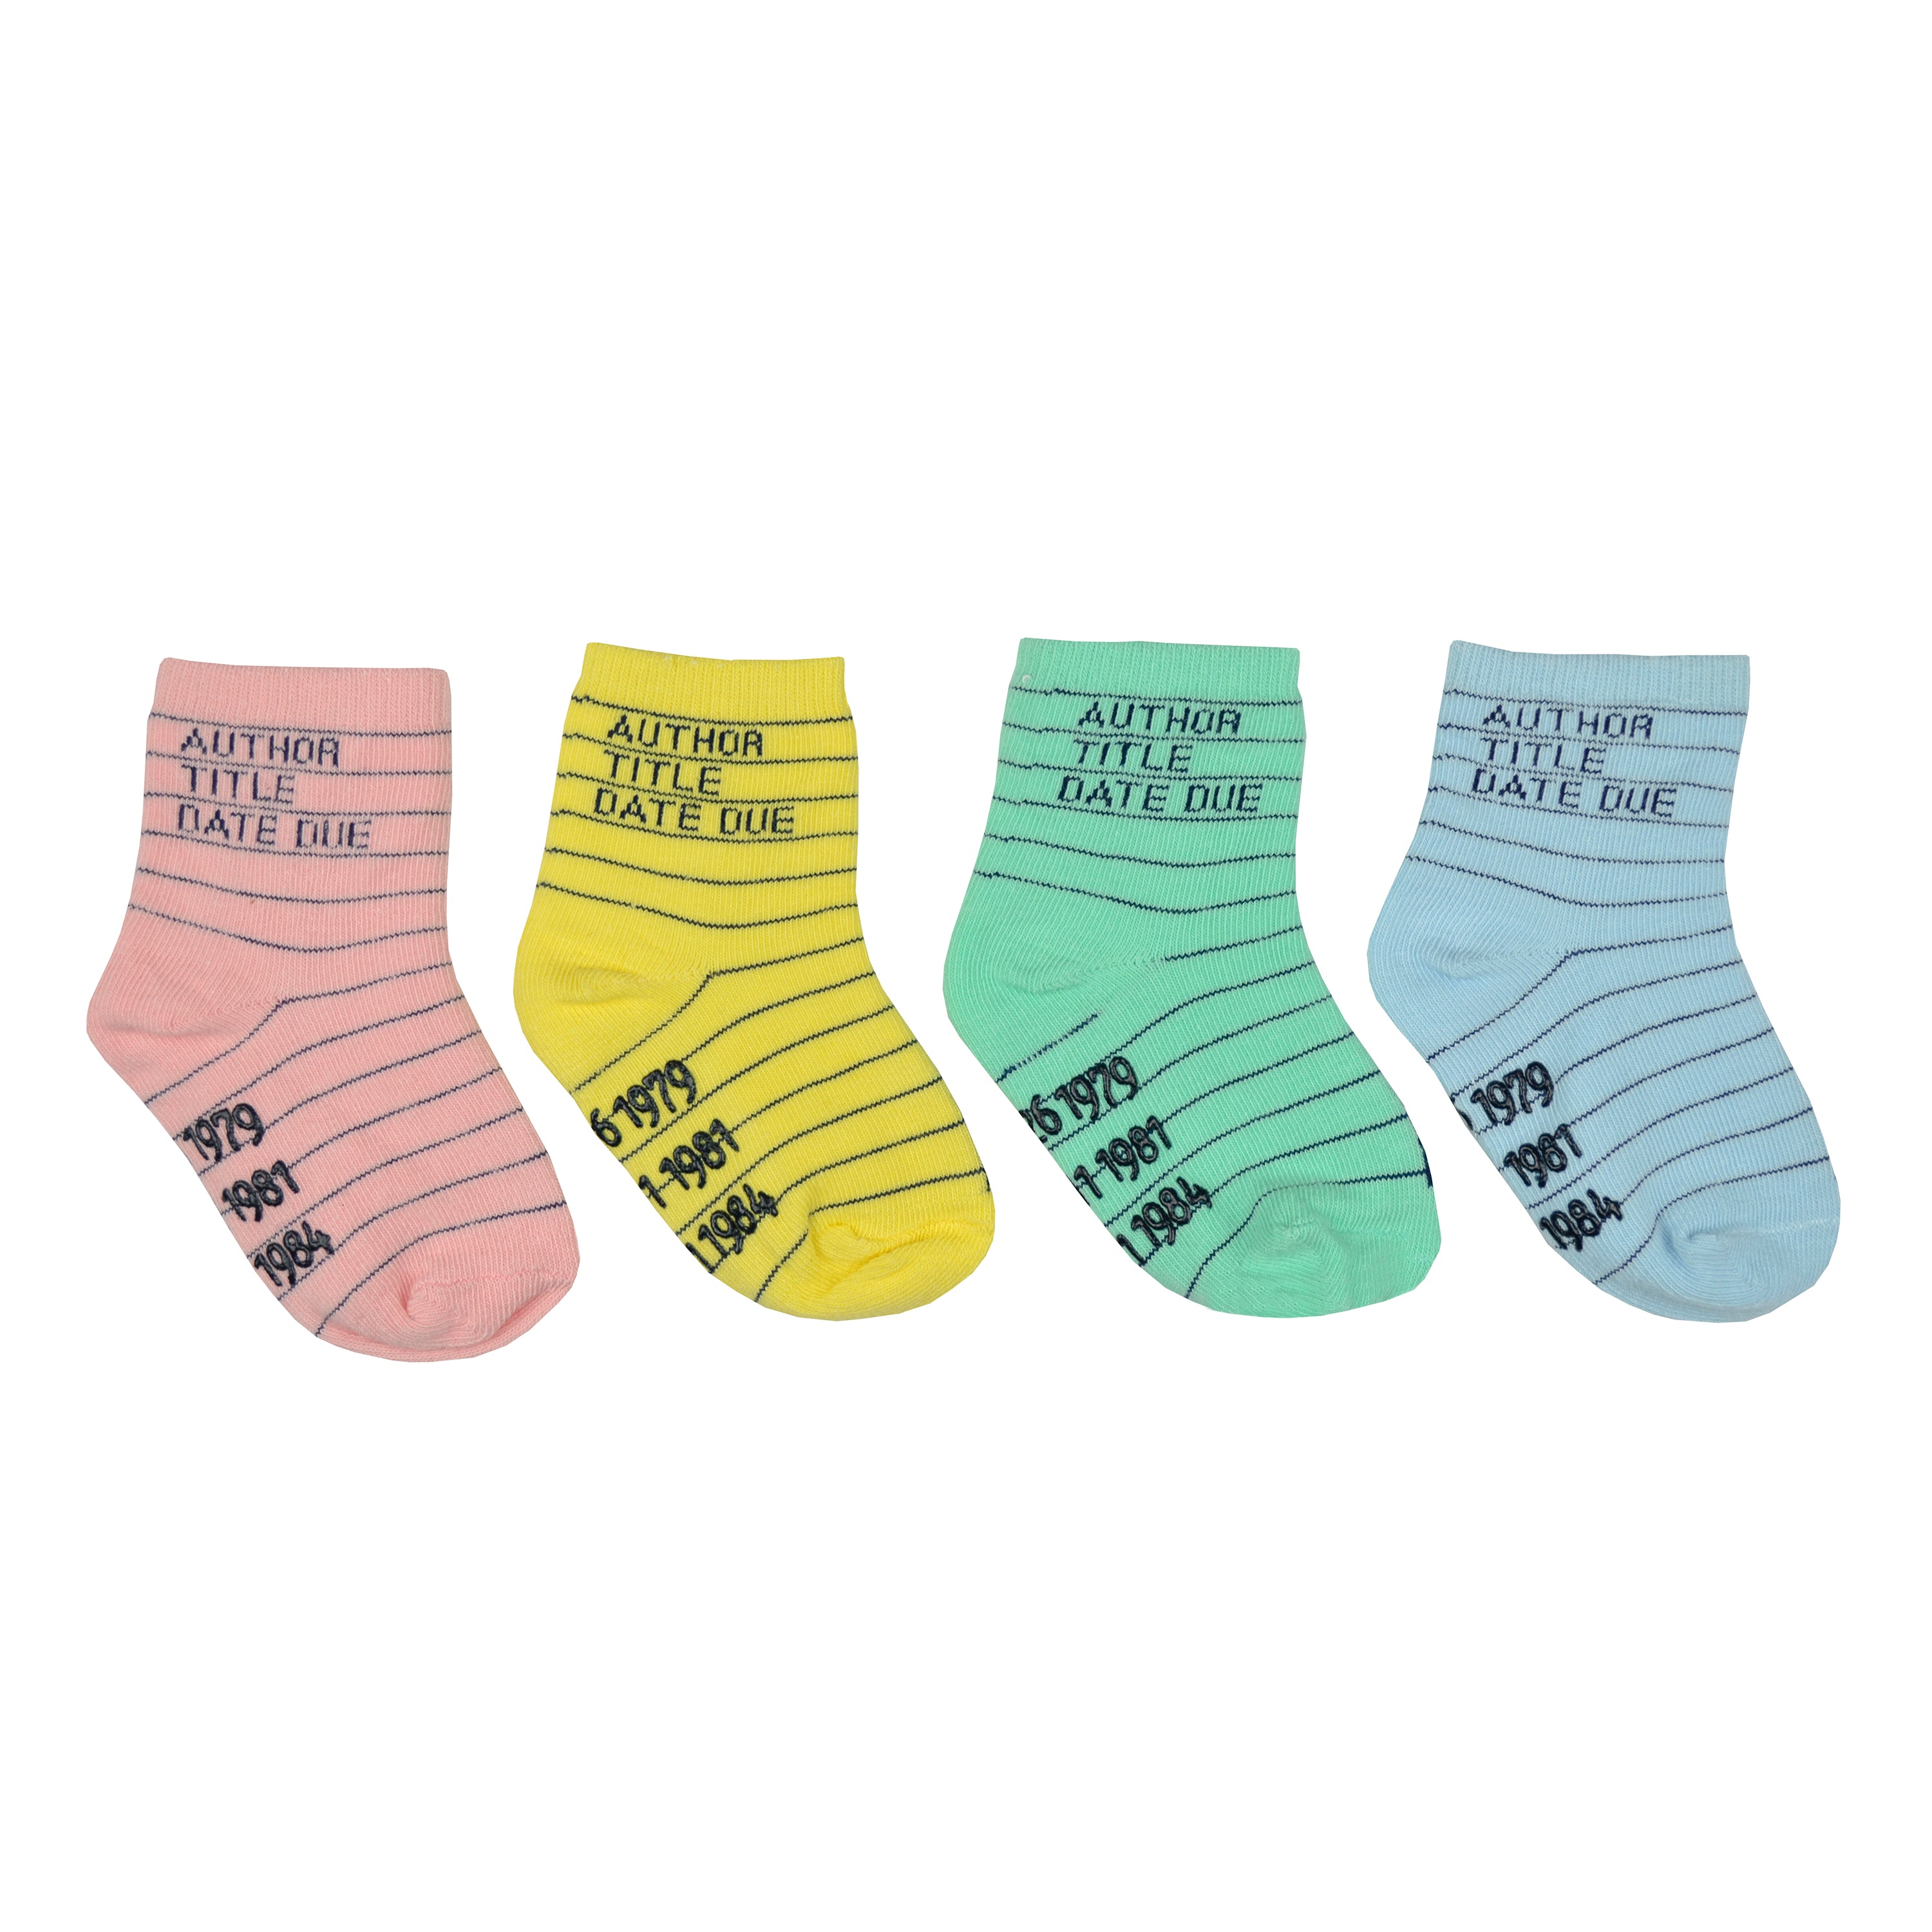 This 4 pack of kids socks by the brand Out of Print features a crew length library card design and comes with pink, yellow, green, and blue socks.